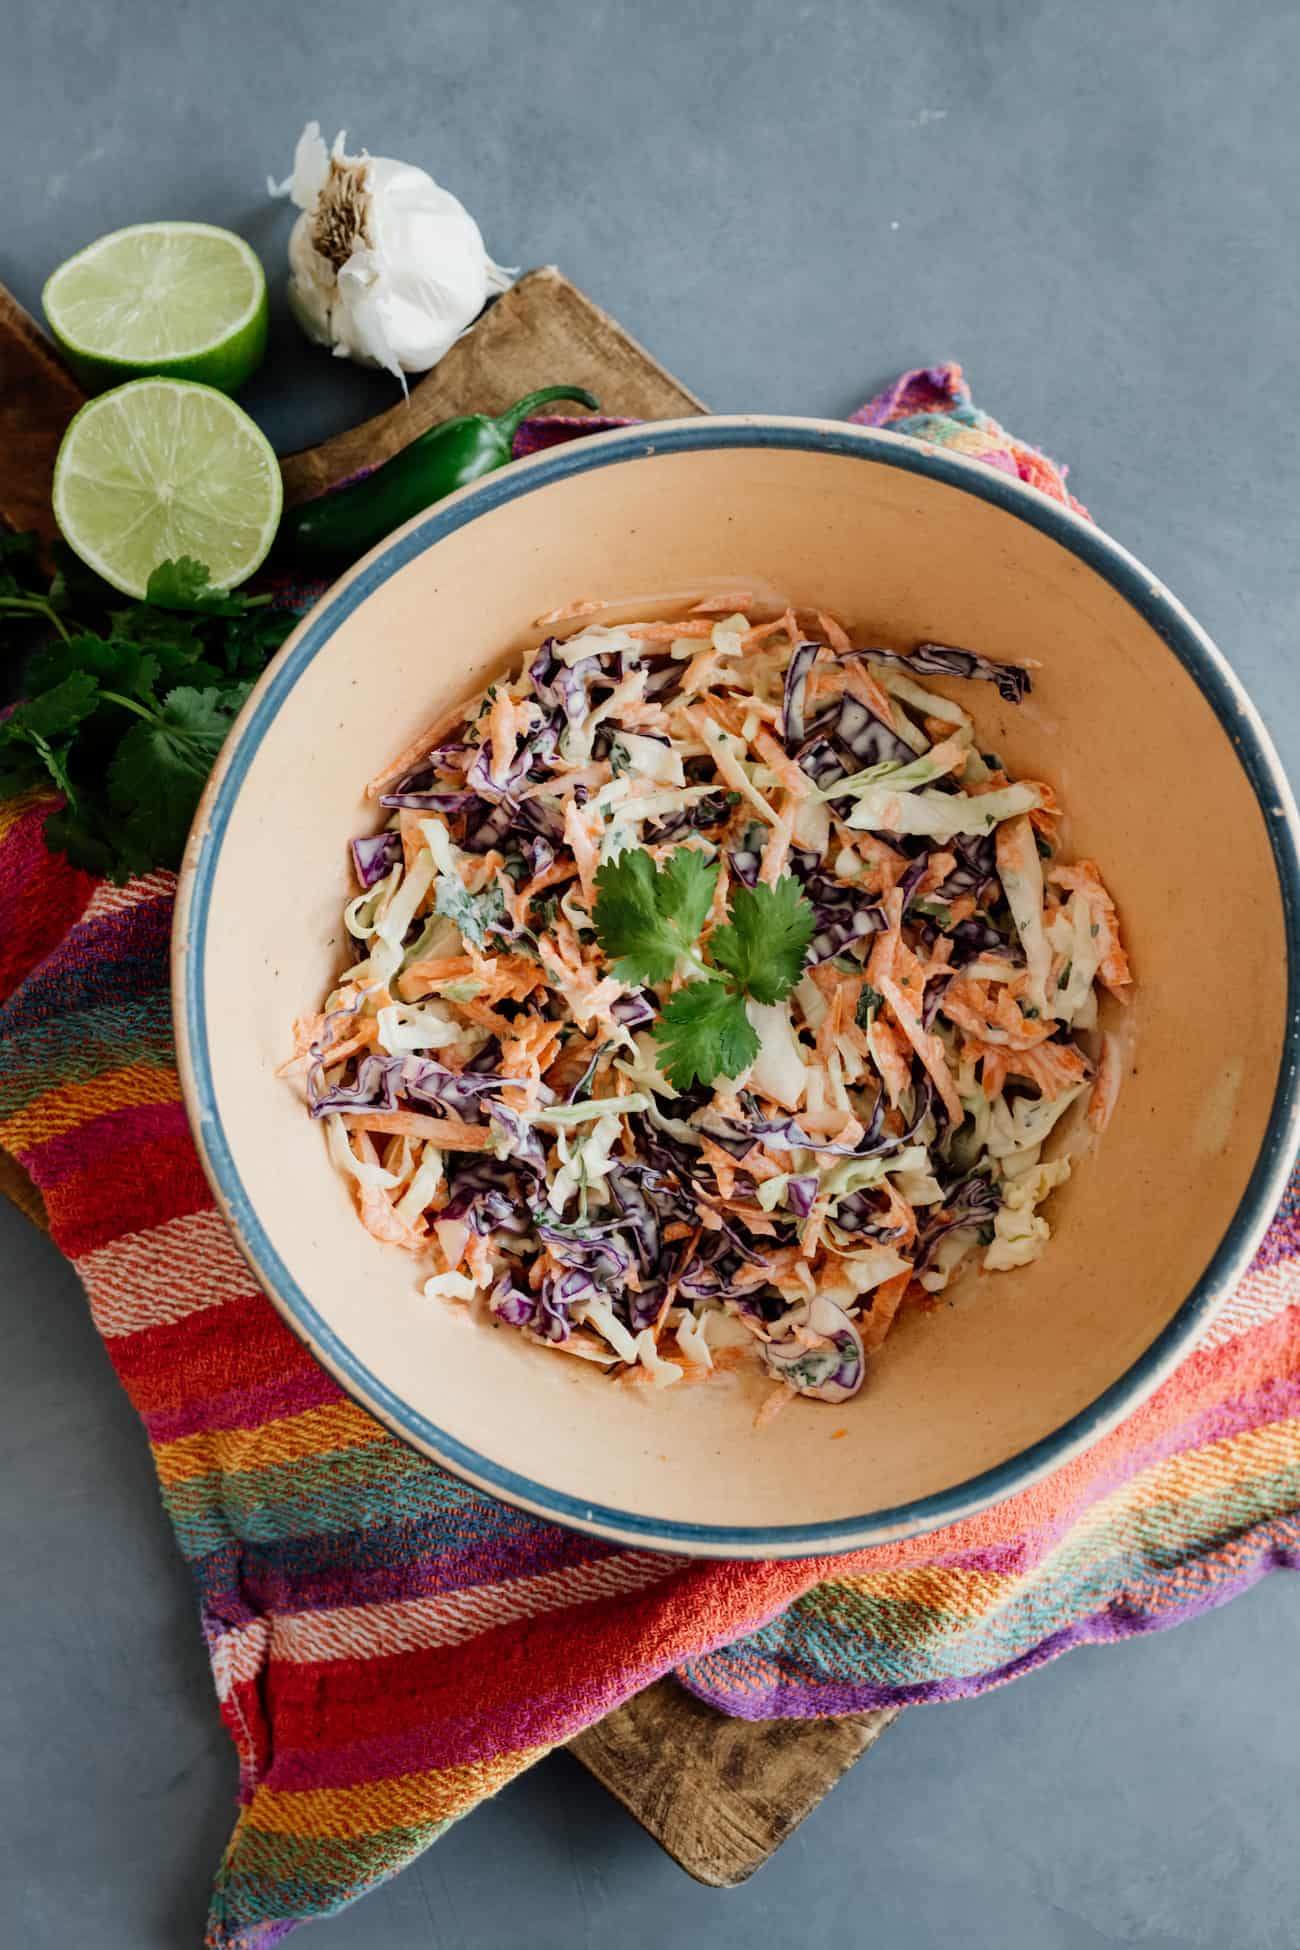 spicy coleslaw for fish tacos in a blue rimmed bowl on a rainbow striped kitchen towel.